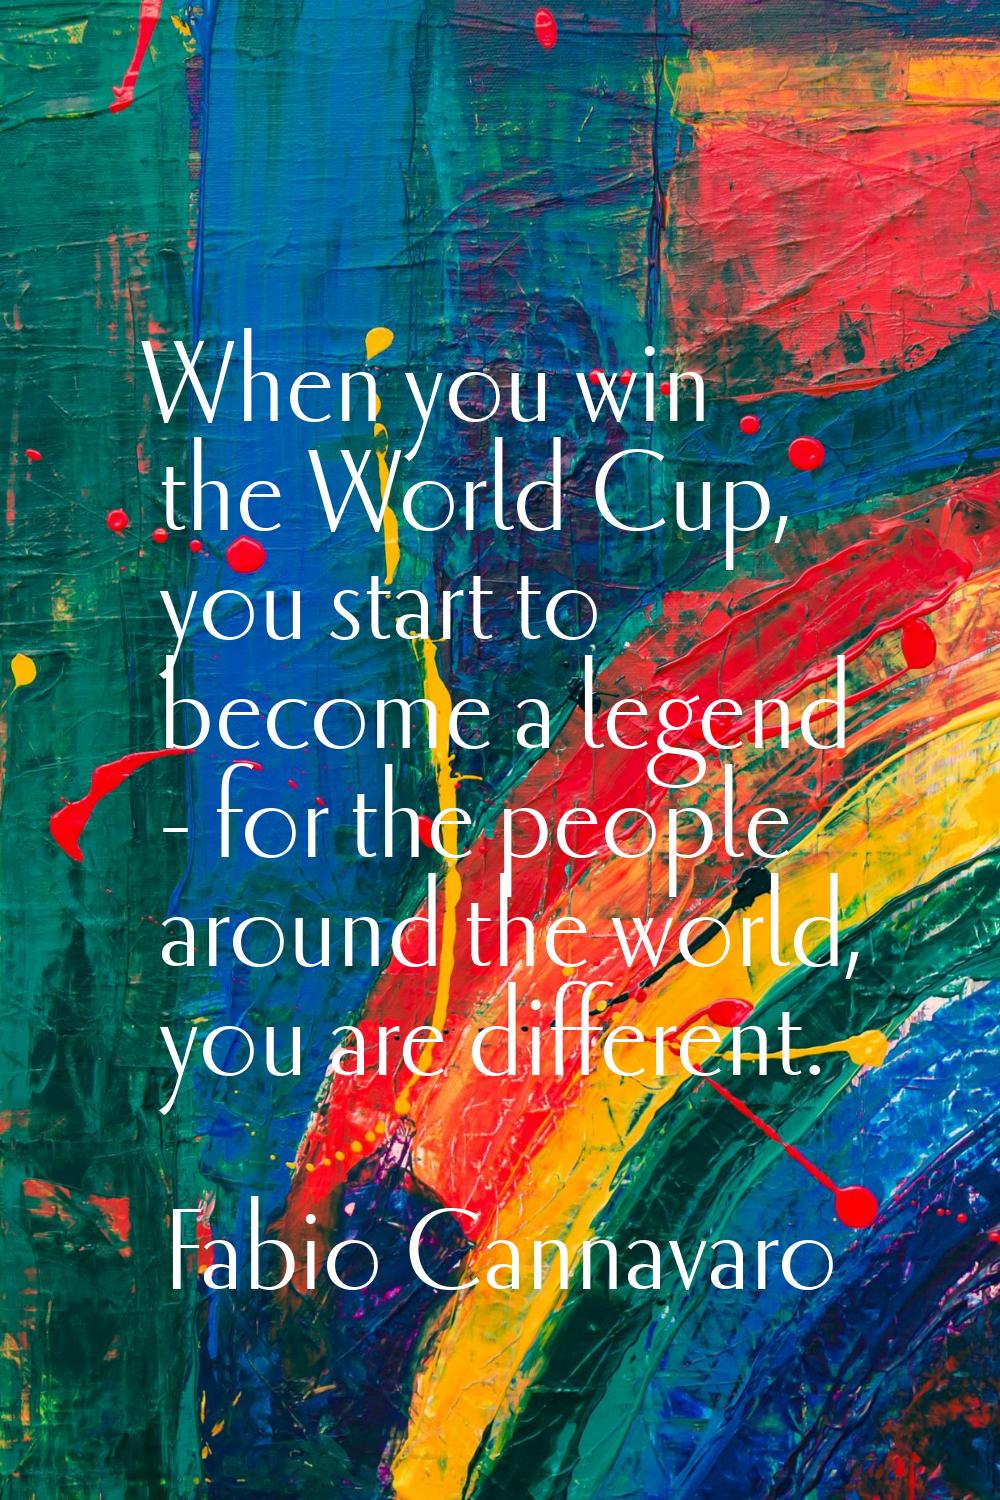 When you win the World Cup, you start to become a legend - for the people around the world, you are